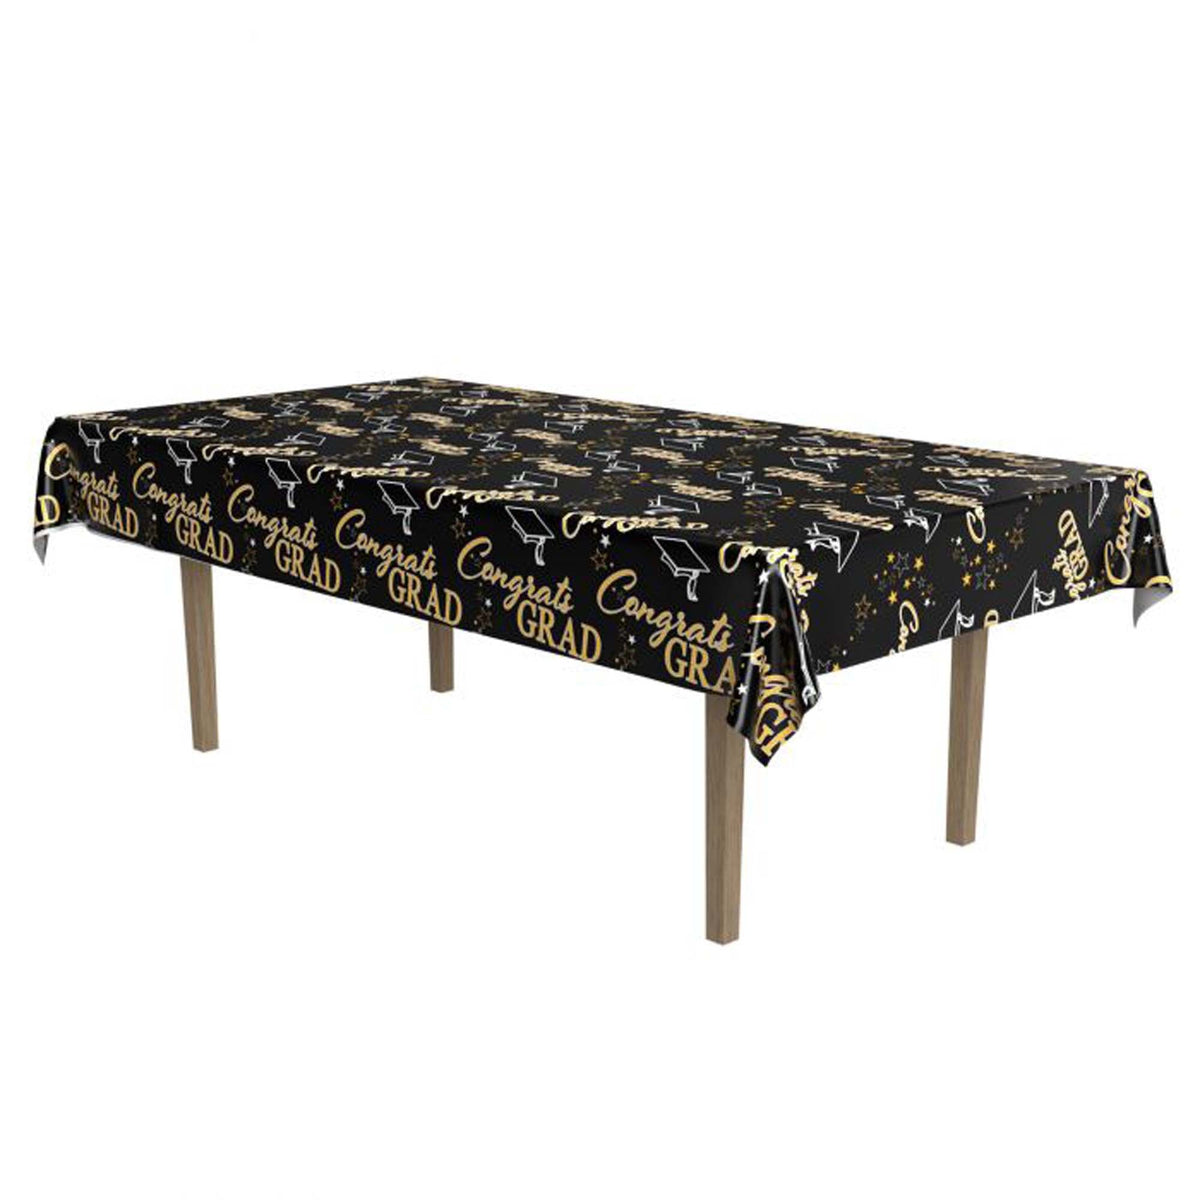 BEISTLE COMPANY Graduation Metallic Black and Gold Graduation Table Cover, 1 Count